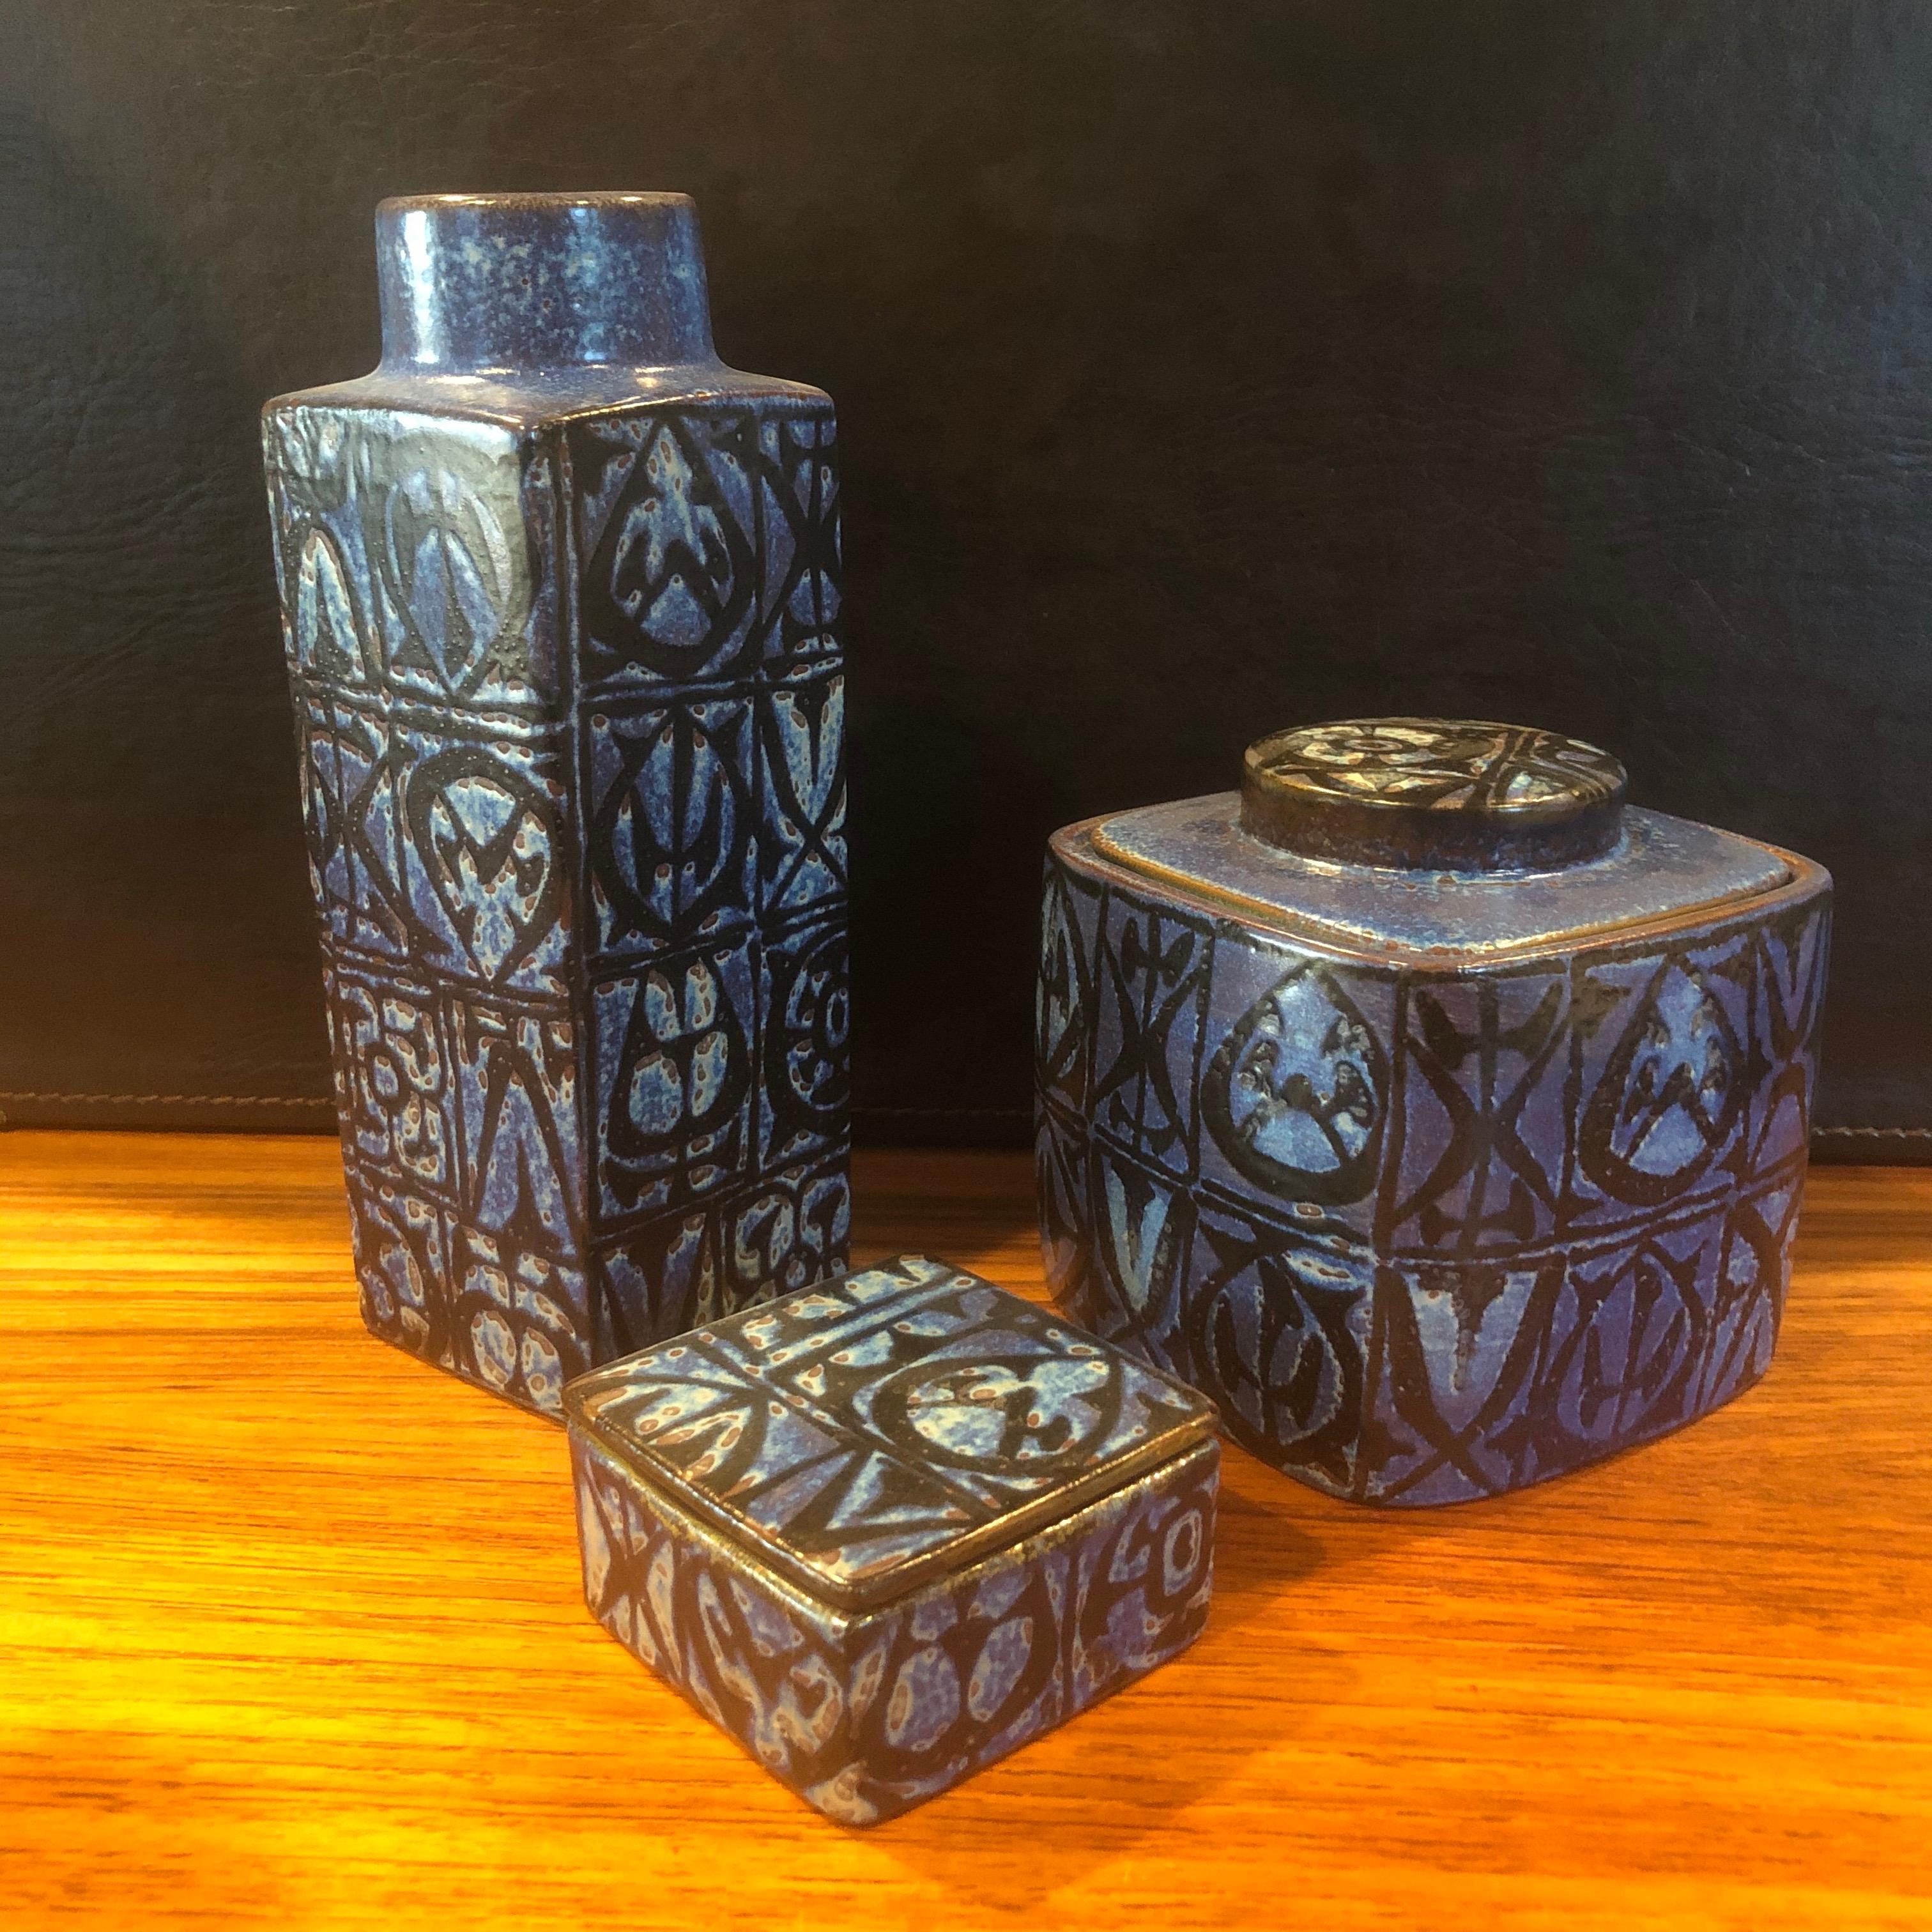 Wonderful Fajance three-piece vase, lidded box and humidor set from the Baca line by Nils Thorsson for Royal Copenhagen, circa 1960s. The stunning blue and black glazed stoneware containers with geometric abstract design was designed by Royal